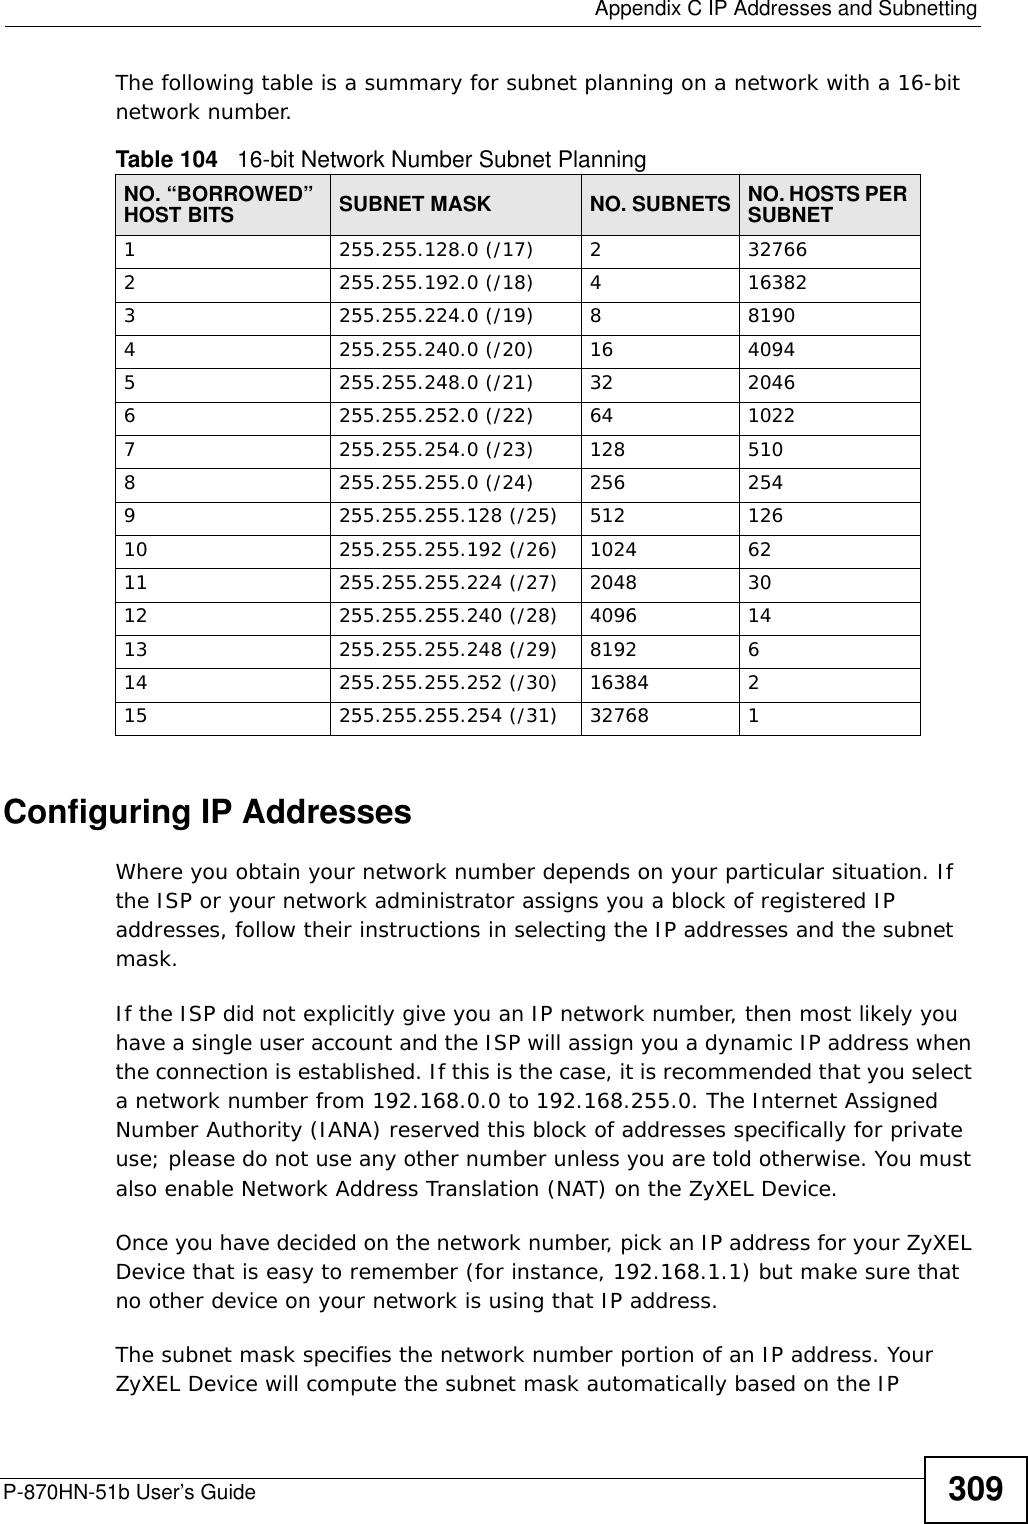  Appendix C IP Addresses and SubnettingP-870HN-51b User’s Guide 309The following table is a summary for subnet planning on a network with a 16-bit network number. Configuring IP AddressesWhere you obtain your network number depends on your particular situation. If the ISP or your network administrator assigns you a block of registered IP addresses, follow their instructions in selecting the IP addresses and the subnet mask.If the ISP did not explicitly give you an IP network number, then most likely you have a single user account and the ISP will assign you a dynamic IP address when the connection is established. If this is the case, it is recommended that you select a network number from 192.168.0.0 to 192.168.255.0. The Internet Assigned Number Authority (IANA) reserved this block of addresses specifically for private use; please do not use any other number unless you are told otherwise. You must also enable Network Address Translation (NAT) on the ZyXEL Device. Once you have decided on the network number, pick an IP address for your ZyXEL Device that is easy to remember (for instance, 192.168.1.1) but make sure that no other device on your network is using that IP address.The subnet mask specifies the network number portion of an IP address. Your ZyXEL Device will compute the subnet mask automatically based on the IP Table 104   16-bit Network Number Subnet PlanningNO. “BORROWED” HOST BITS SUBNET MASK NO. SUBNETS NO. HOSTS PER SUBNET1255.255.128.0 (/17) 2327662255.255.192.0 (/18) 4163823255.255.224.0 (/19) 881904255.255.240.0 (/20) 16 40945255.255.248.0 (/21) 32 20466255.255.252.0 (/22) 64 10227255.255.254.0 (/23) 128 5108255.255.255.0 (/24) 256 2549255.255.255.128 (/25) 512 12610 255.255.255.192 (/26) 1024 6211 255.255.255.224 (/27) 2048 3012 255.255.255.240 (/28) 4096 1413 255.255.255.248 (/29) 8192 614 255.255.255.252 (/30) 16384 215 255.255.255.254 (/31) 32768 1